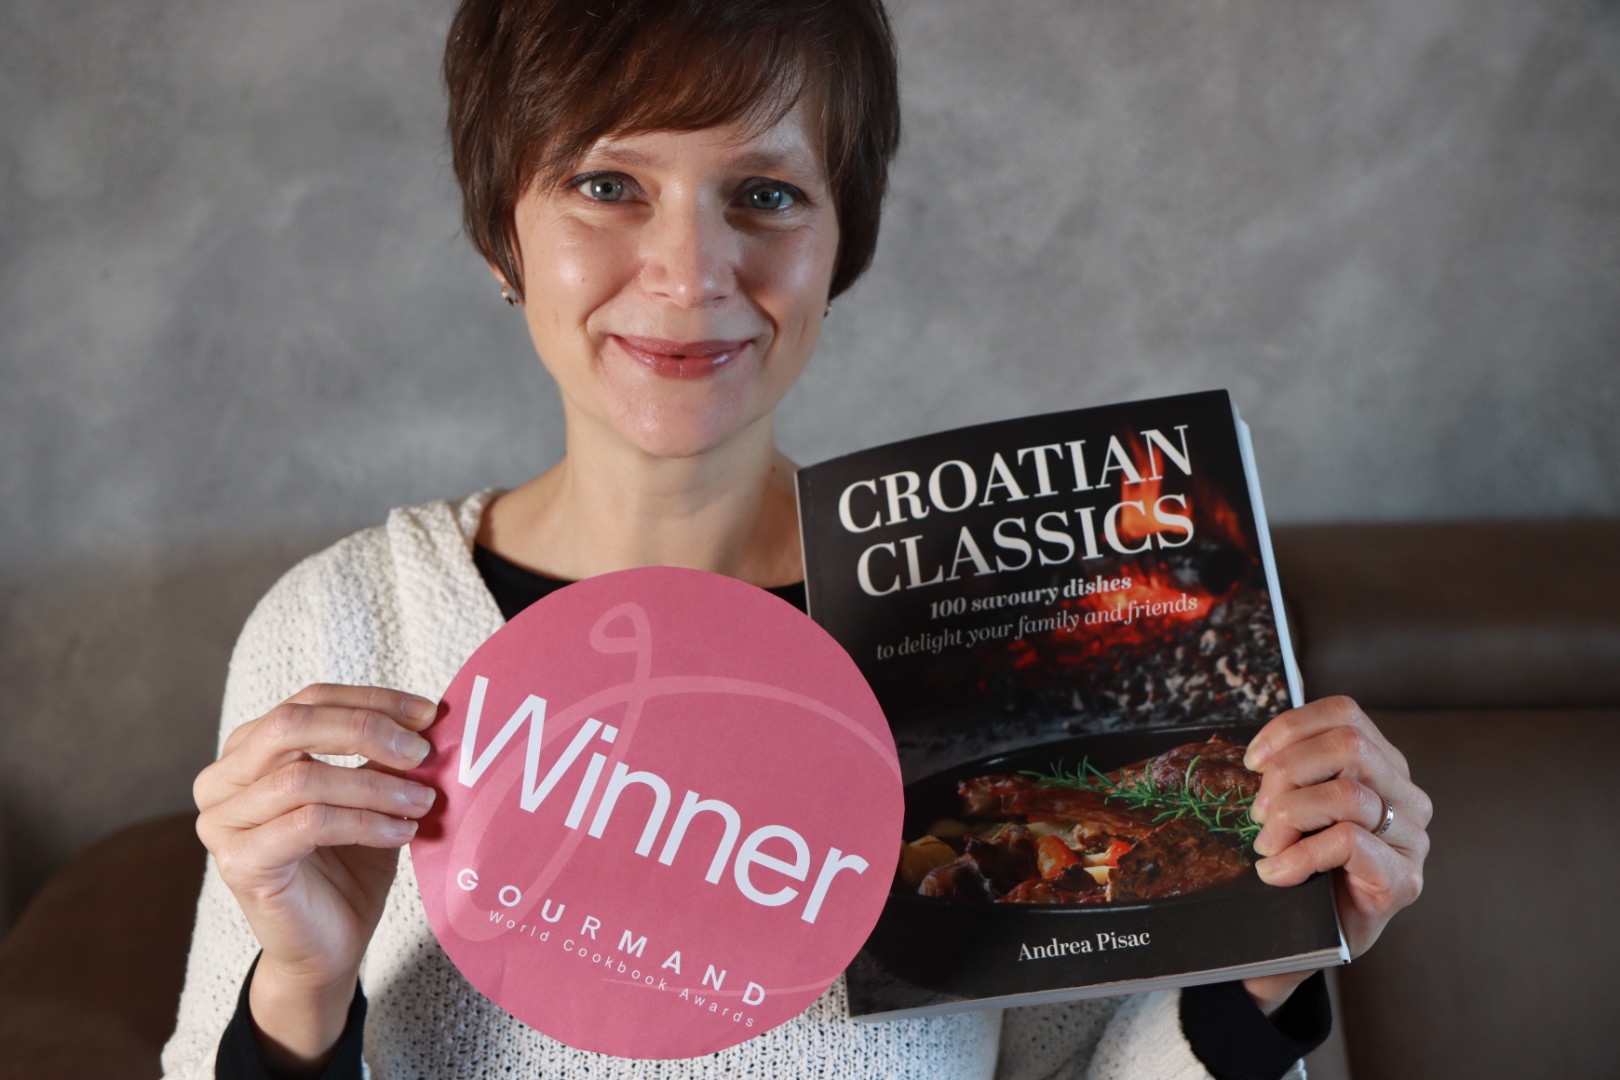 Croatian cookbook in English nominated for the Gourmand World Cookbook Award